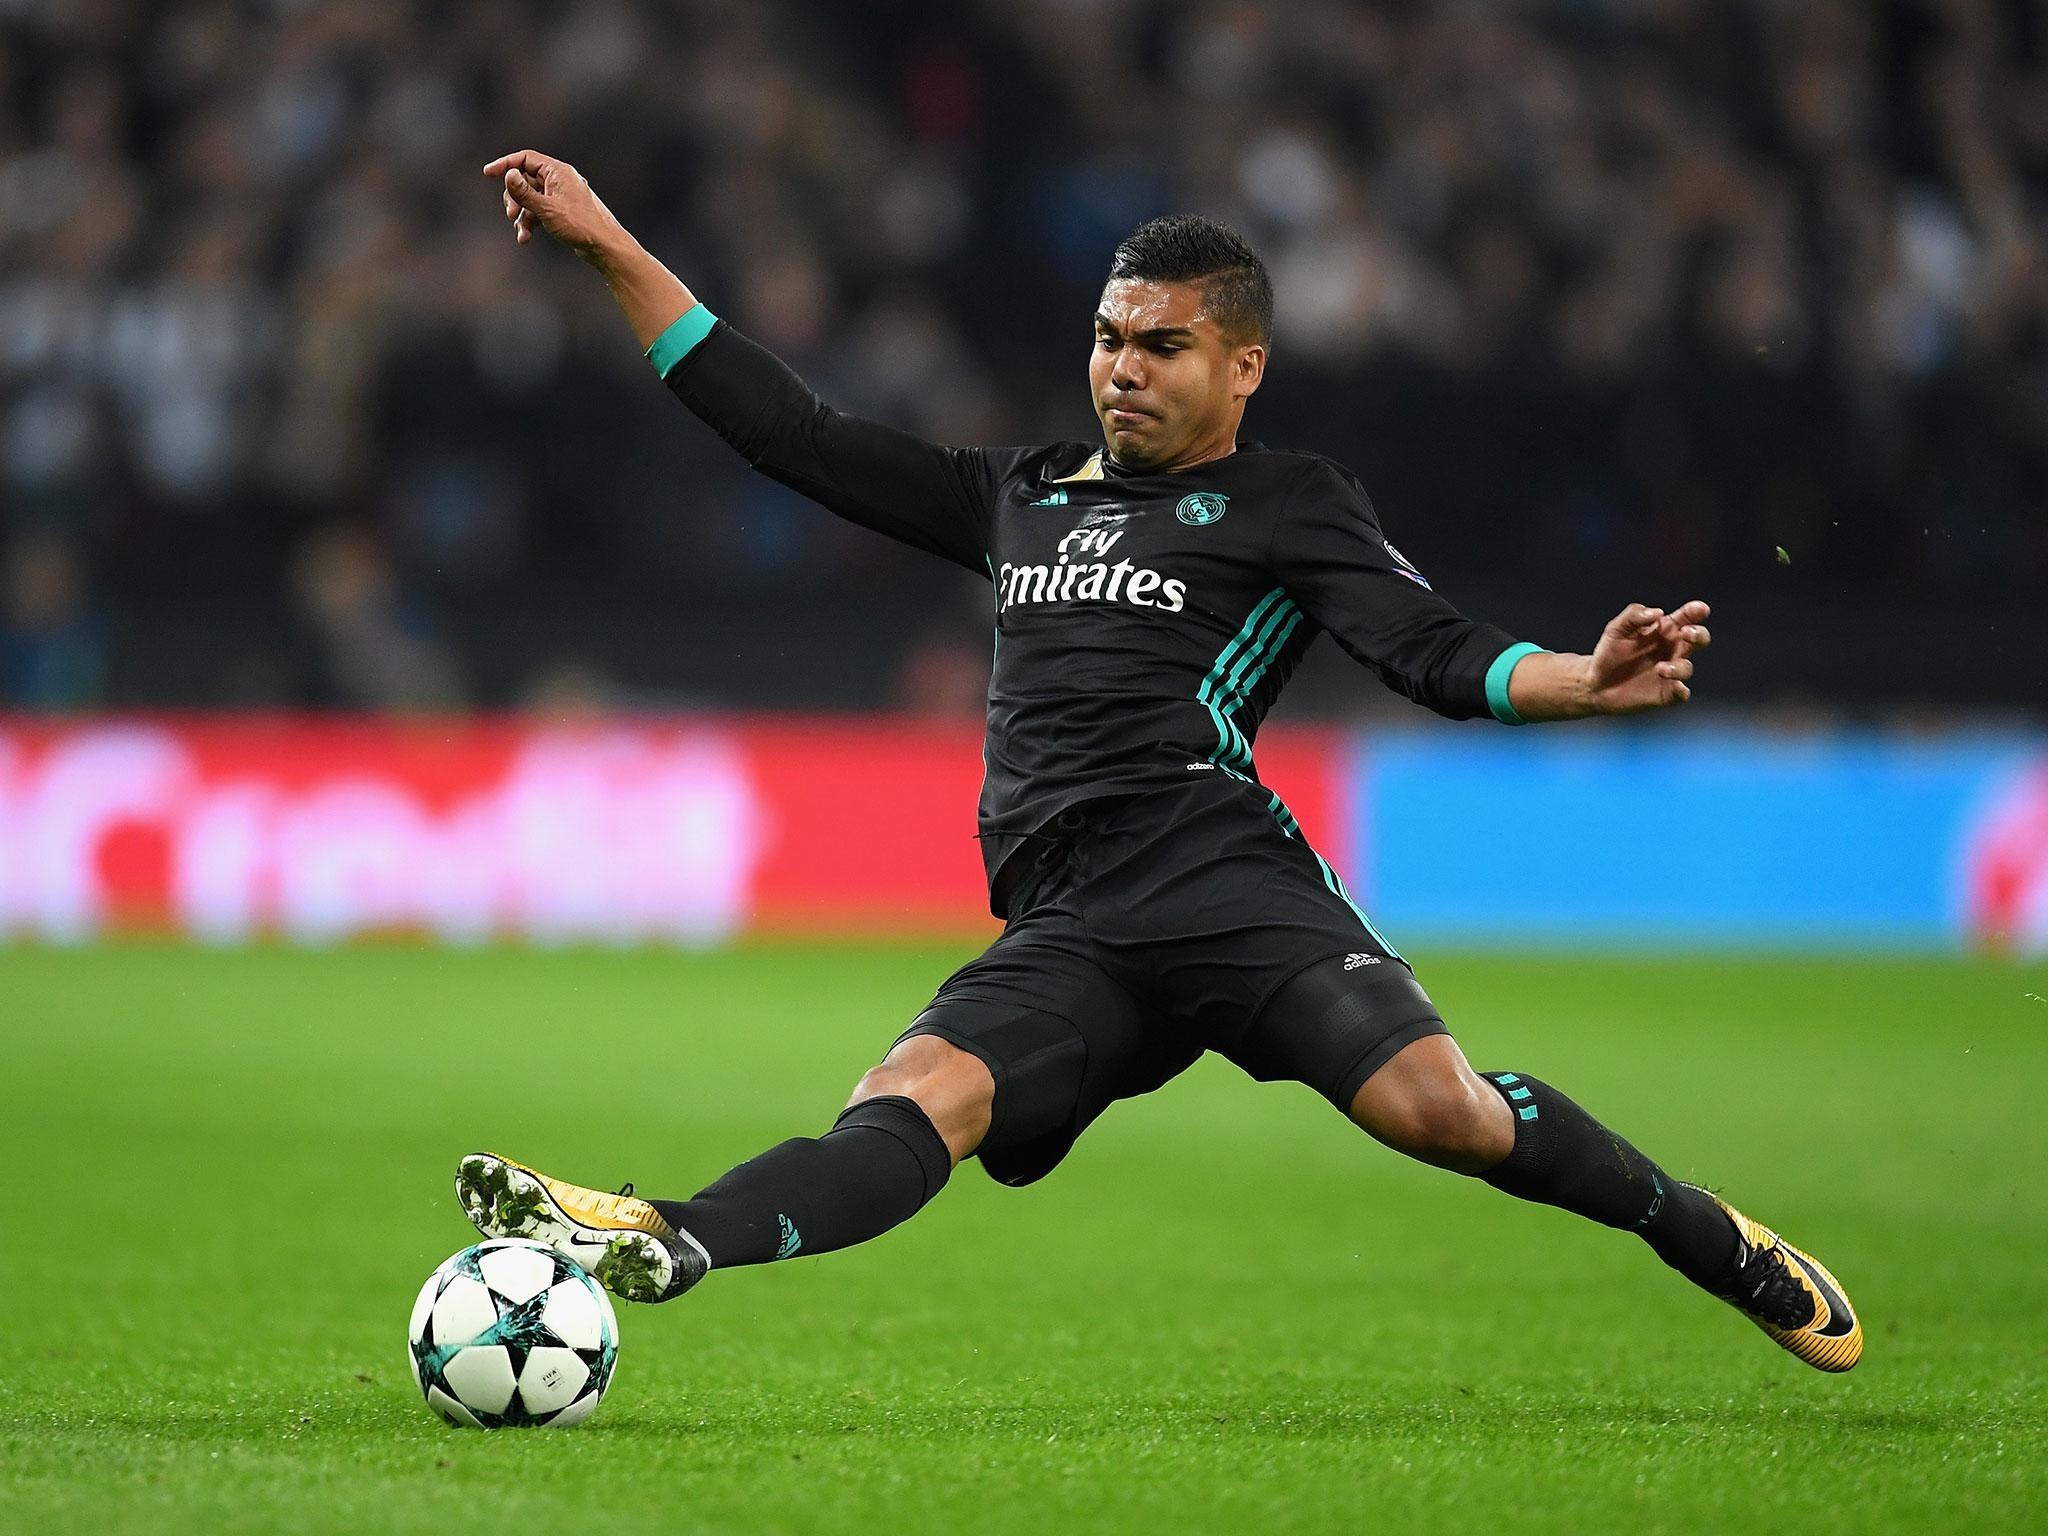 Casemiro is crucial to Madrid's chances